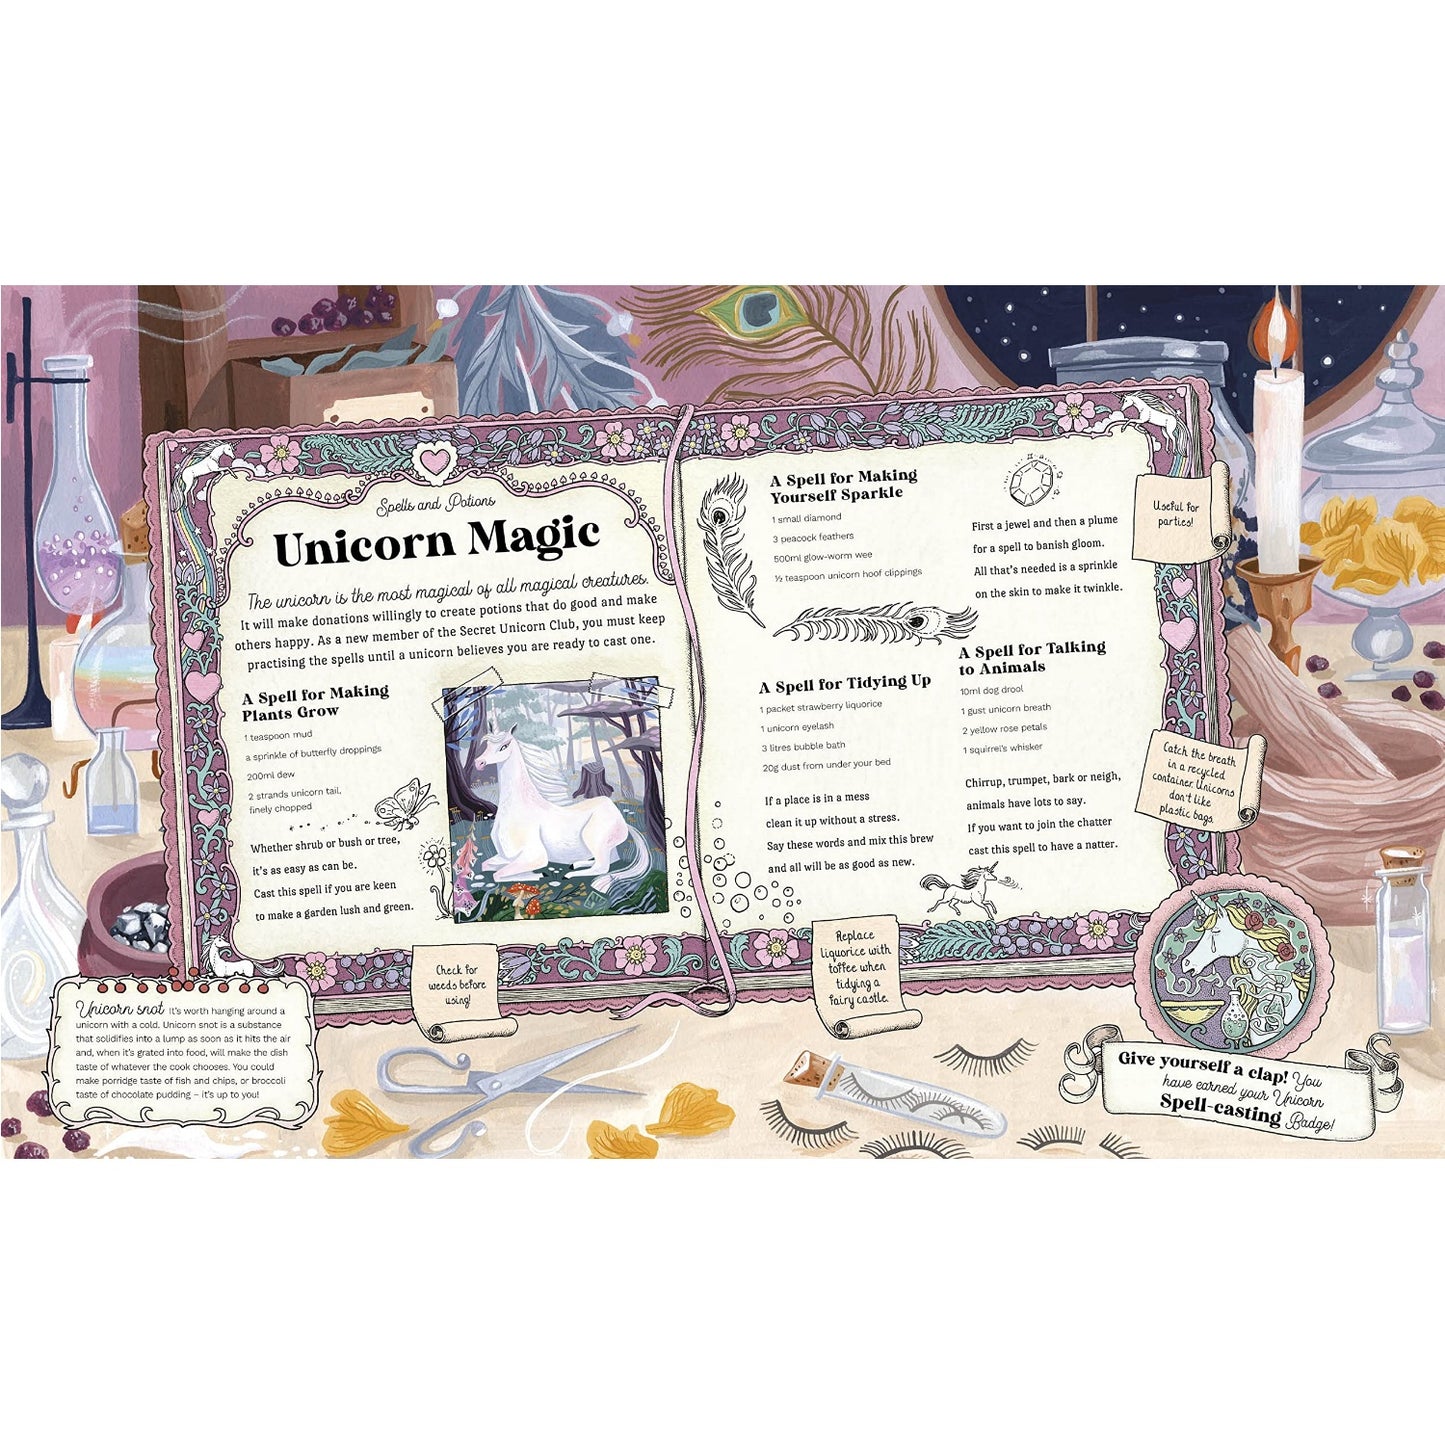 The Secret Unicorn Club - Discover the Hidden Book within a Book! | Hardcover | Children's Books